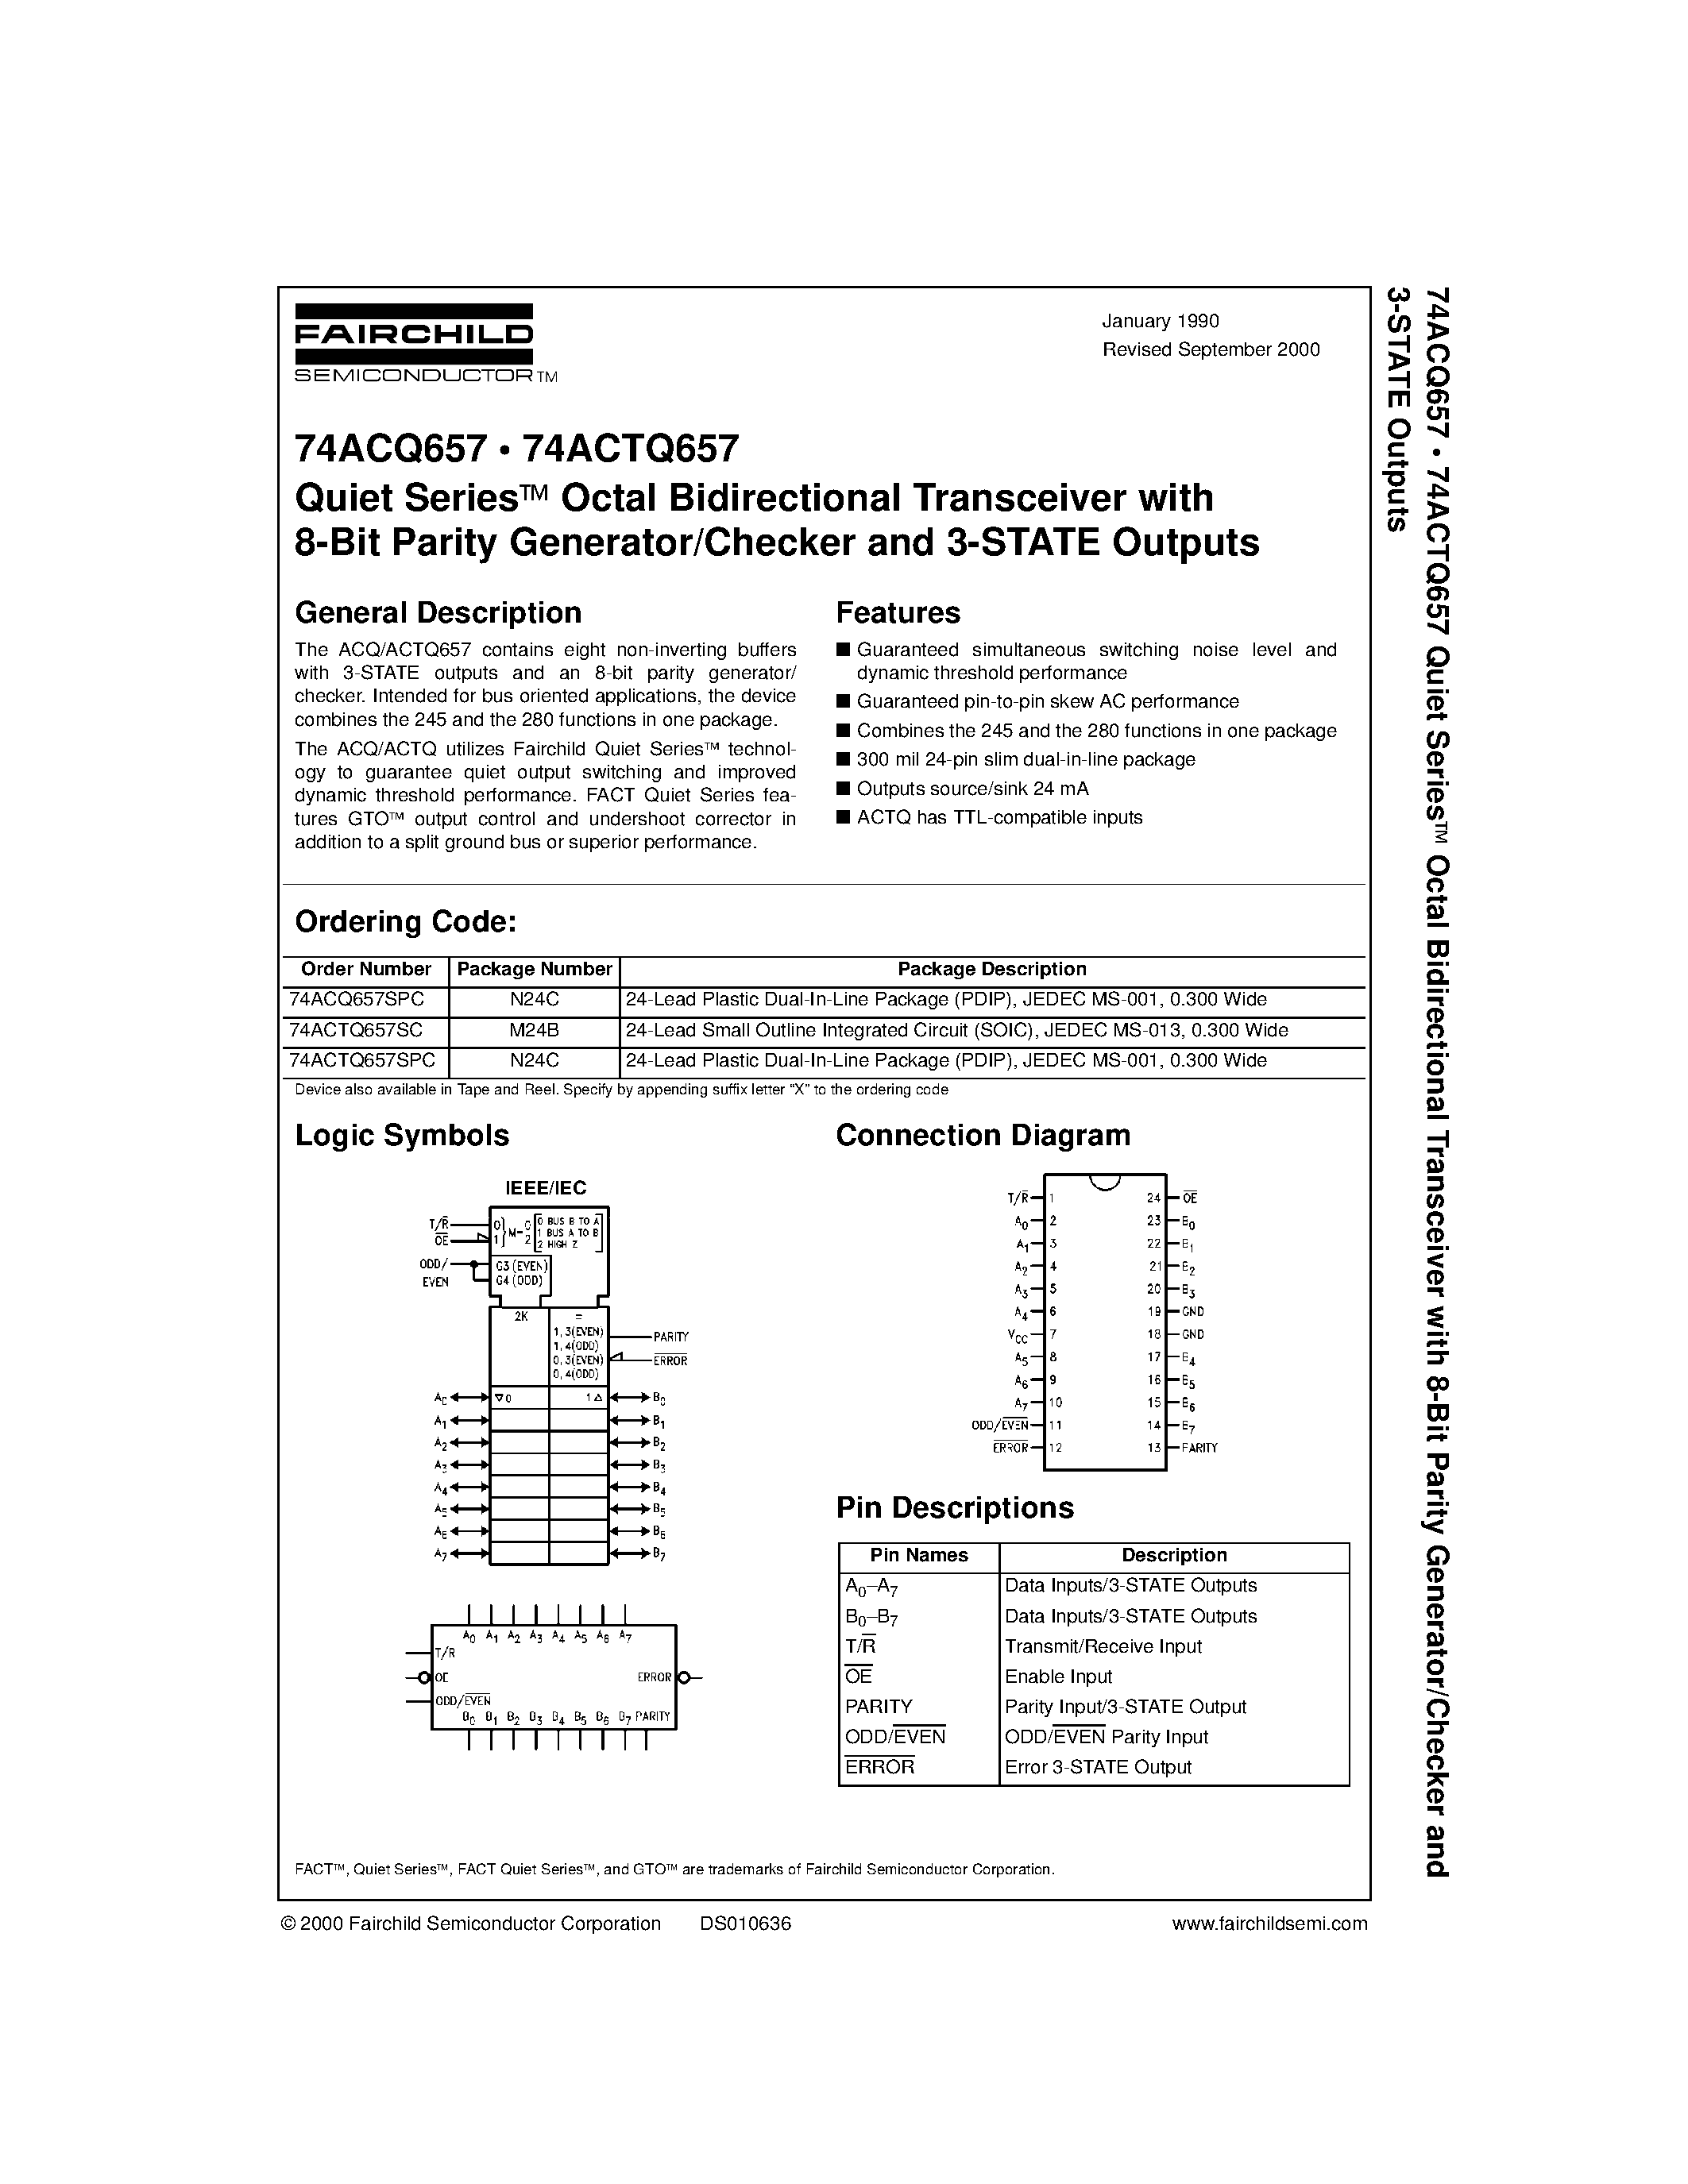 Datasheet 74ACQ657SPC - Quiet Series Octal Bidirectional Transceiver with 8-Bit Parity Generator/Checker and 3-STATE Outputs page 1